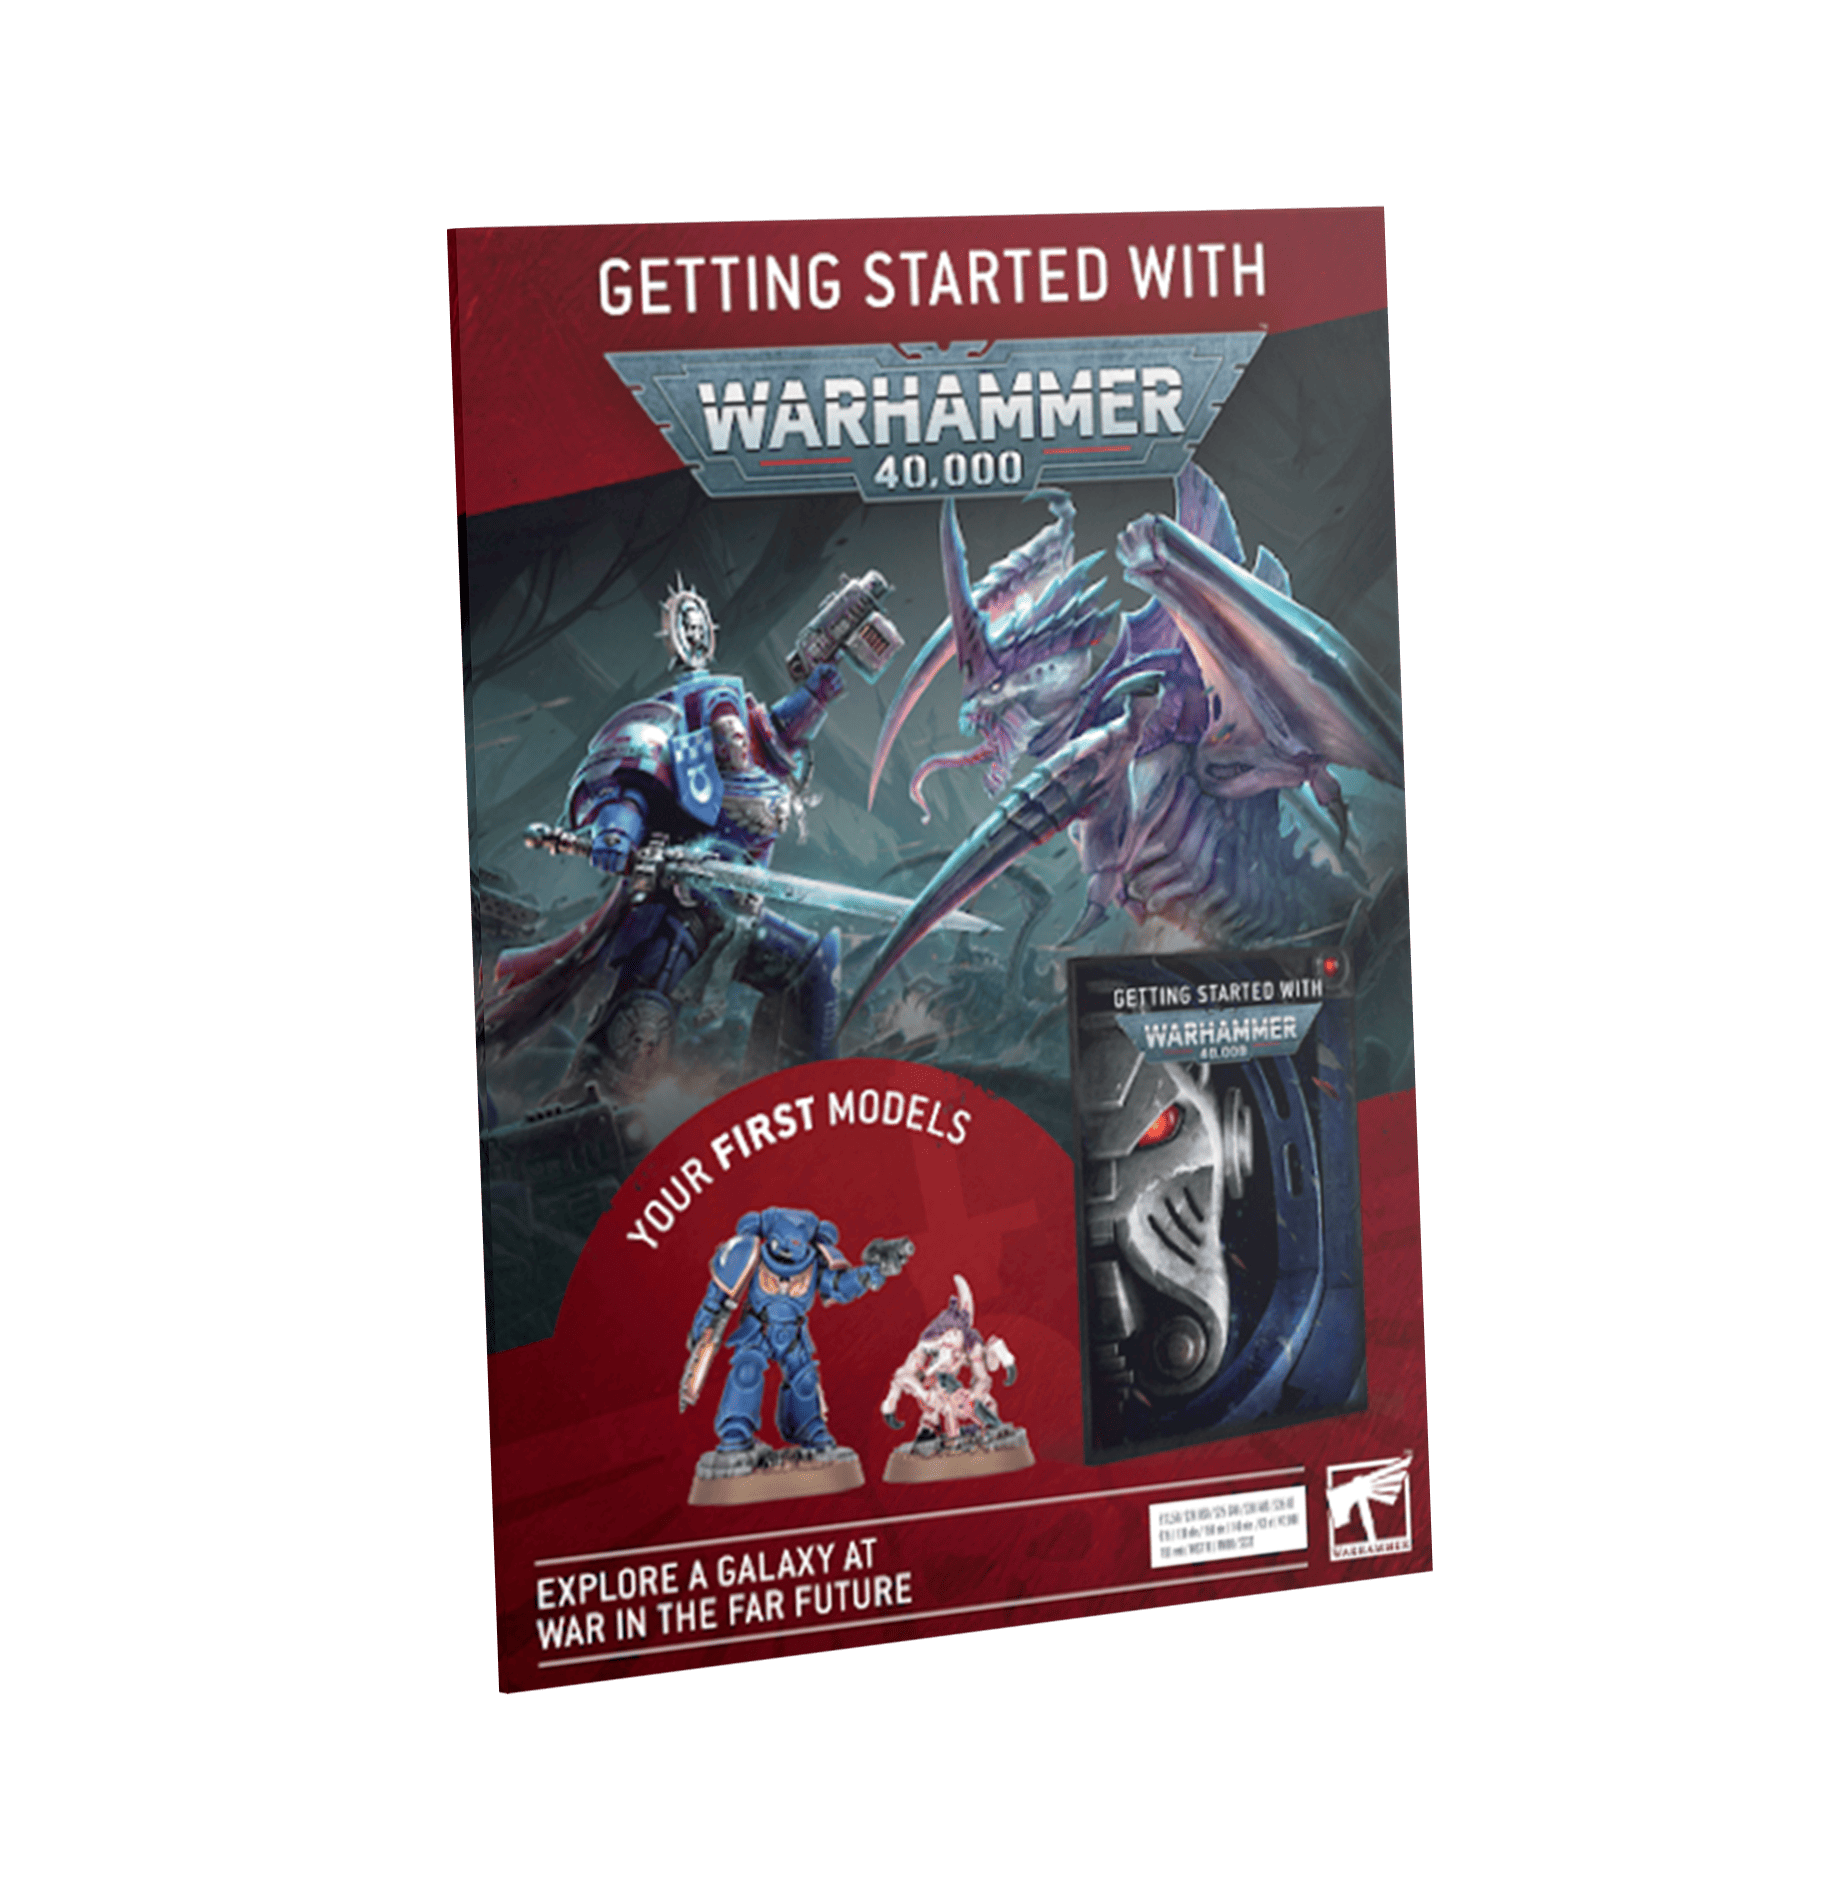 How to play Warhammer 40,000 - and what to buy first